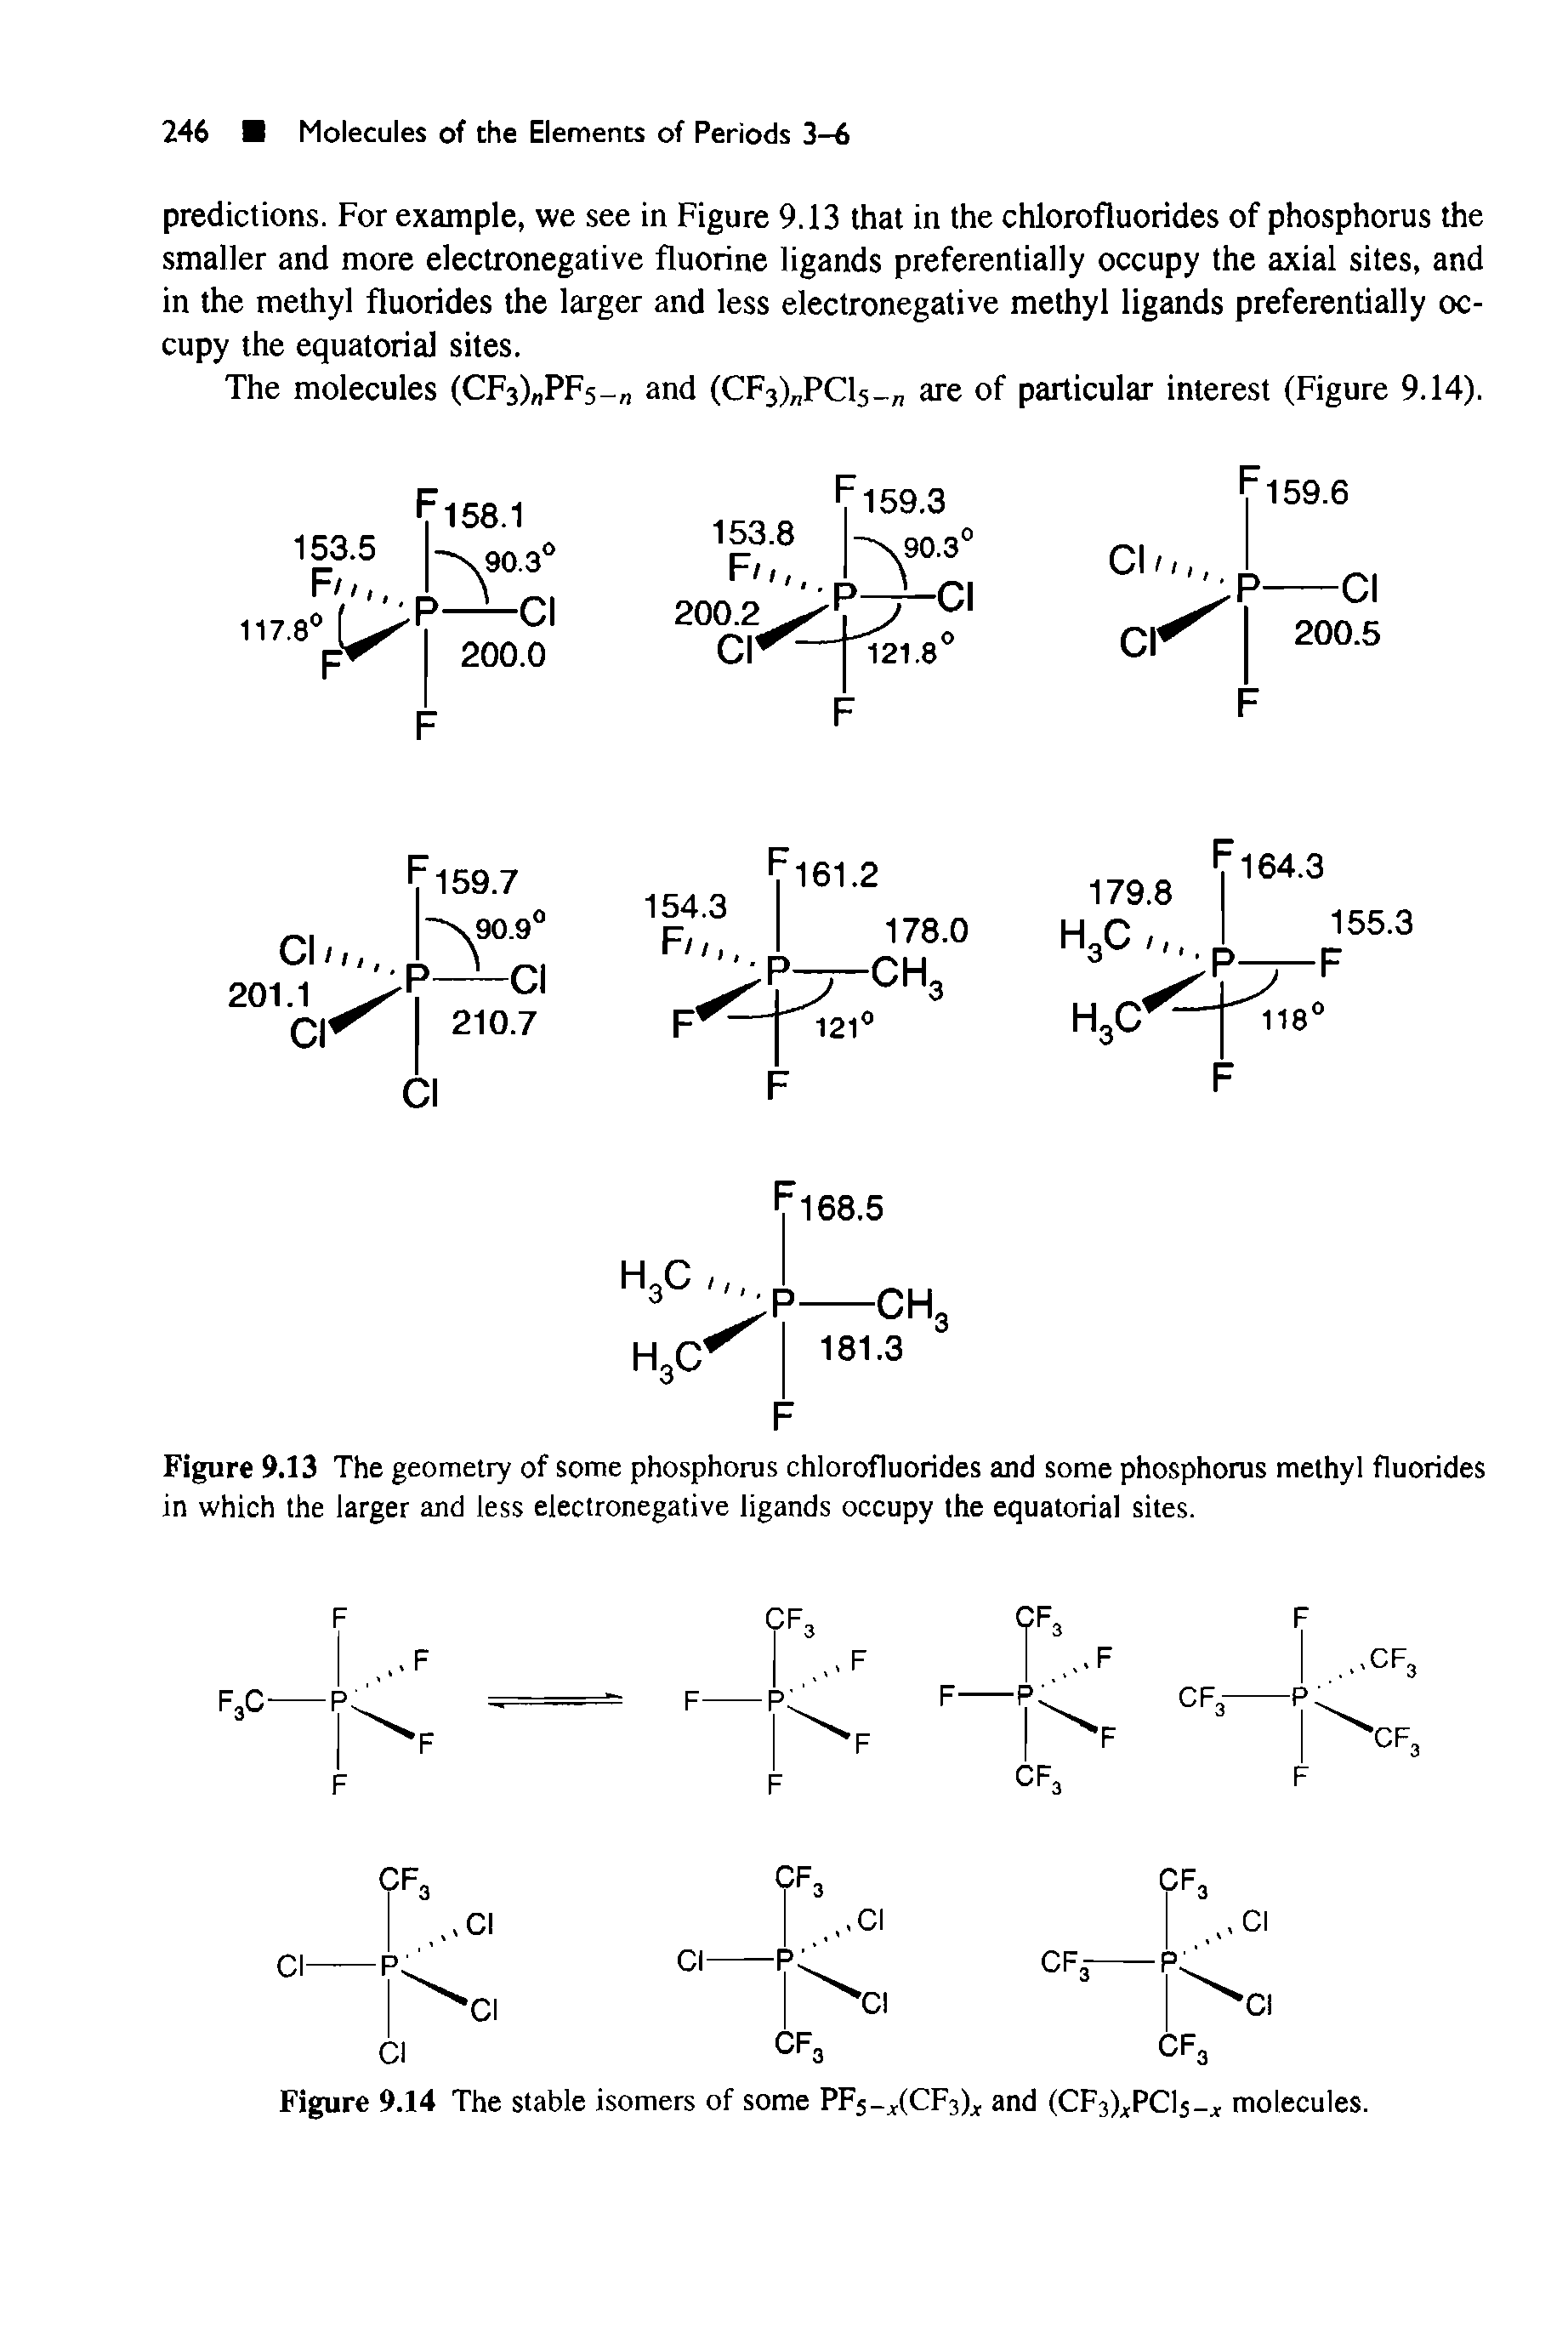 Figure 9.13 The geometry of some phosphorus chlorofluorides and some phosphorus methyl fluorides in which the larger and less electronegative ligands occupy the equatorial sites.